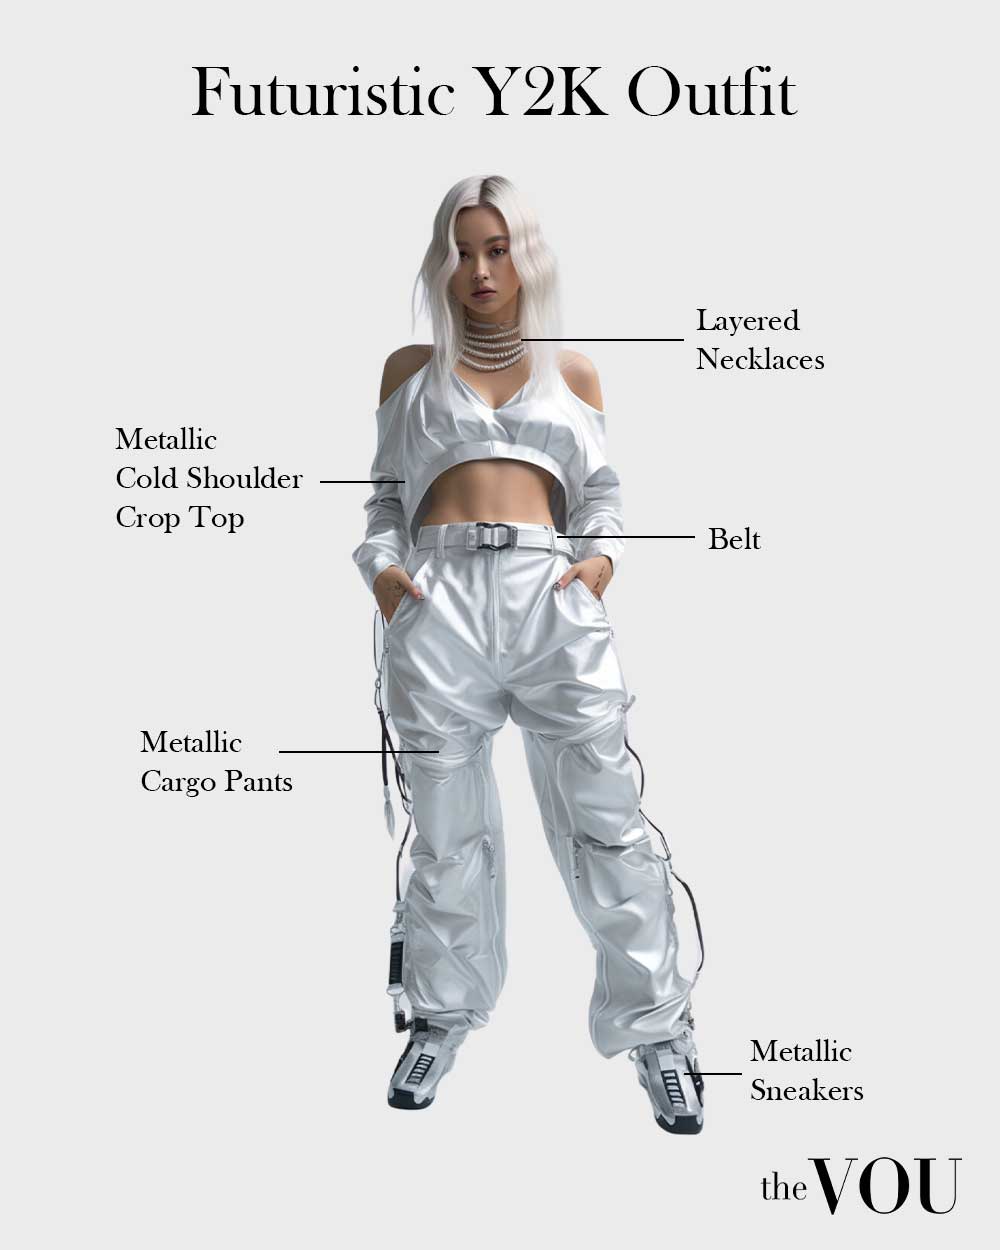 Futuristic Y2K Style outfit for women